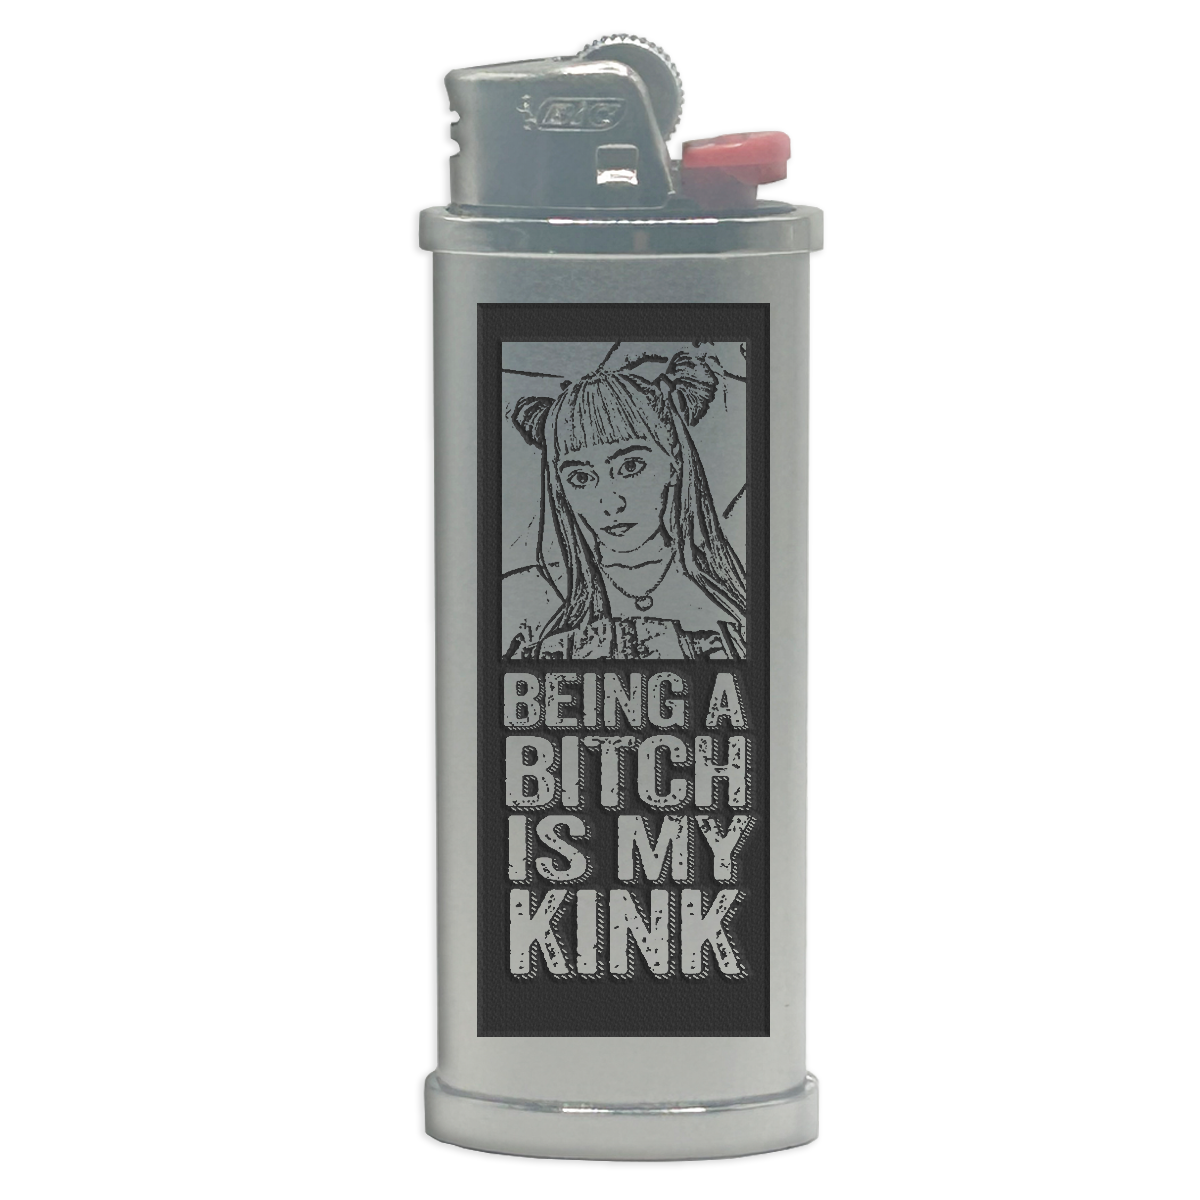 Being a Bitch is My Kink Engraved Lighter